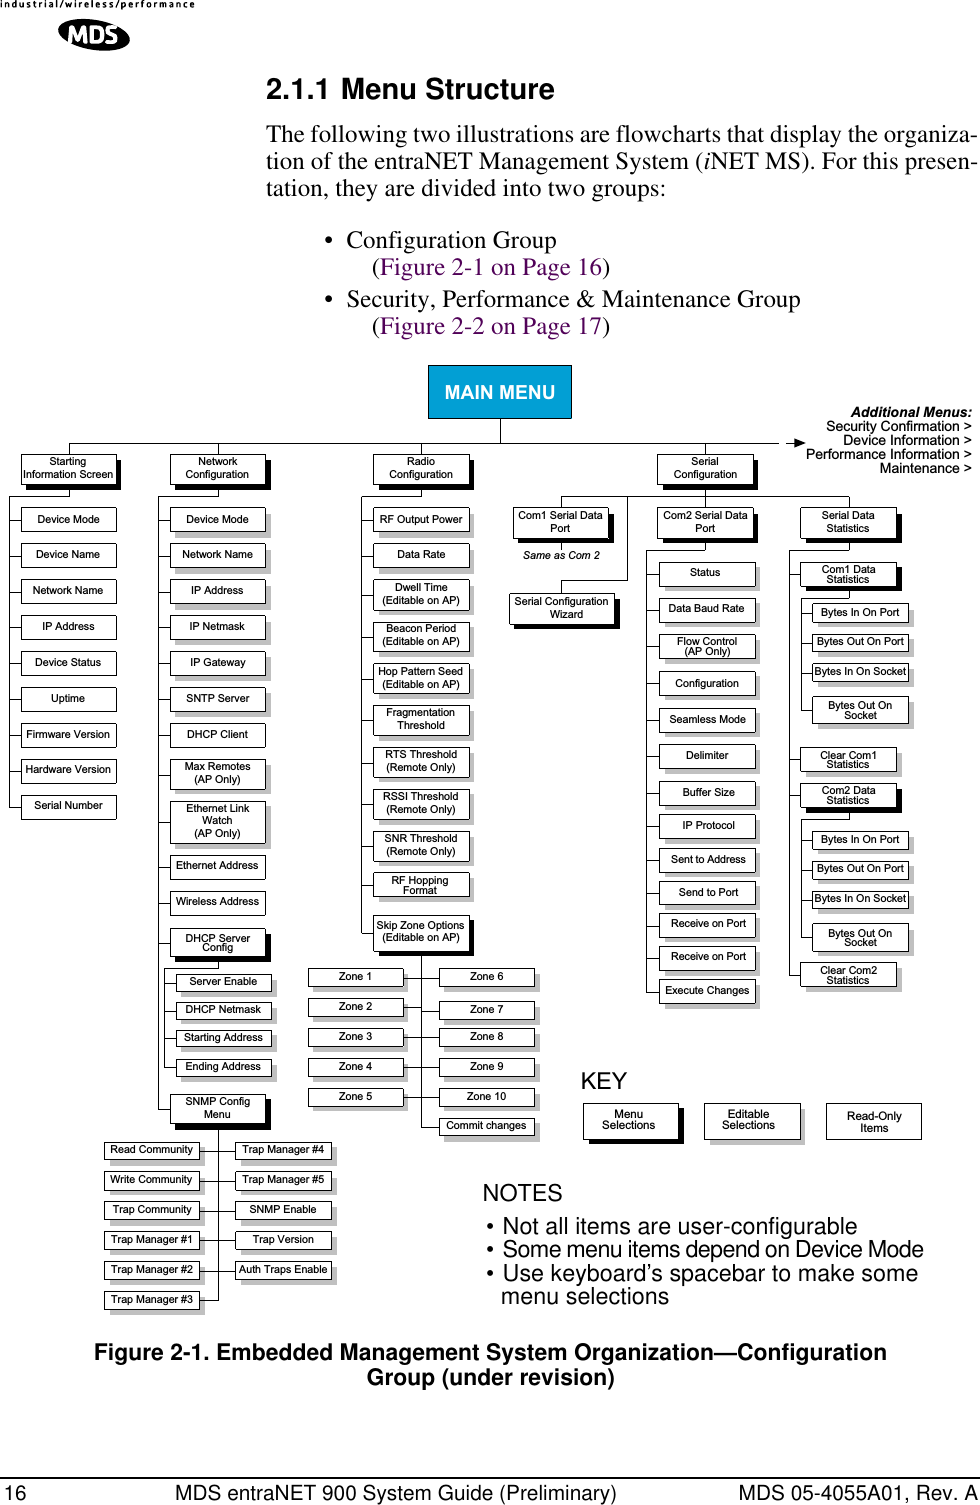 16 MDS entraNET 900 System Guide (Preliminary) MDS 05-4055A01, Rev. A2.1.1 Menu StructureThe following two illustrations are flowcharts that display the organiza-tion of the entraNET Management System (iNET MS). For this presen-tation, they are divided into two groups:• Configuration Group     (Figure 2-1 on Page 16)• Security, Performance &amp; Maintenance Group     (Figure 2-2 on Page 17)  Bytes Out OnSocketClear Com2StatisticsRadioConfigurationRF Output PowerData RateDwell Time(Editable on AP)Beacon Period(Editable on AP)Hop Pattern Seed(Editable on AP)FragmentationThresholdRTS Threshold(Remote Only)RSSI Threshold(Remote Only)SNR Threshold(Remote Only)RF HoppingFormatSkip Zone Options(Editable on AP)Zone 1 Zone 6Zone 2 Zone 7Zone 8Zone 3Zone 4 Zone 9Zone 10Zone 5Commit changesMax Remotes(AP Only)Ethernet LinkWatch(AP Only)Ethernet AddressSNMP ConfigMenuTrap Manager #4Read CommunityWrite Community Trap Manager #5SNMP EnableTrap CommunityTrap Manager #1 Trap VersionAuth Traps EnableTrap Manager #2Trap Manager #3NetworkConfigurationDevice ModeNetwork NameSerial DataStatisticsCom2 Serial DataPortSerialConfigurationCom1 Serial DataPortStartingInformation ScreenIP AddressIP NetmaskIP GatewayWireless AddressDevice ModeDevice NameNetwork NameIP AddressUptimeHardware VersionFirmware VersionSerial NumberDevice StatusSNTP ServerDHCP ClientCom1 DataStatisticsClear Com1StatisticsBytes In On PortBytes Out On PortBytes In On SocketBytes Out OnSocketCom2 DataStatisticsBytes In On PortBytes Out On PortBytes In On SocketDHCP ServerConfigServer EnableDHCP NetmaskStarting AddressEnding AddressAdditional Menus:Security Confirmation &gt;Device Information &gt;Performance Information &gt;Maintenance &gt;StatusData Baud RateExecute ChangesConfigurationSeamless ModeDelimiterBuffer SizeSend to PortSent to AddressFlow Control(AP Only)IP ProtocolReceive on PortReceive on PortSerial ConfigurationWizardSame as Com 2KEYMAIN MENUNOTES•Not all items are user-configurable•Some menu items depend on Device Mode•Use keyboard’s spacebar to make somemenu selectionsMenuSelectionsEditableSelections Read-OnlyItemsFigure 2-1. Embedded Management System Organization—Configuration Group (under revision)